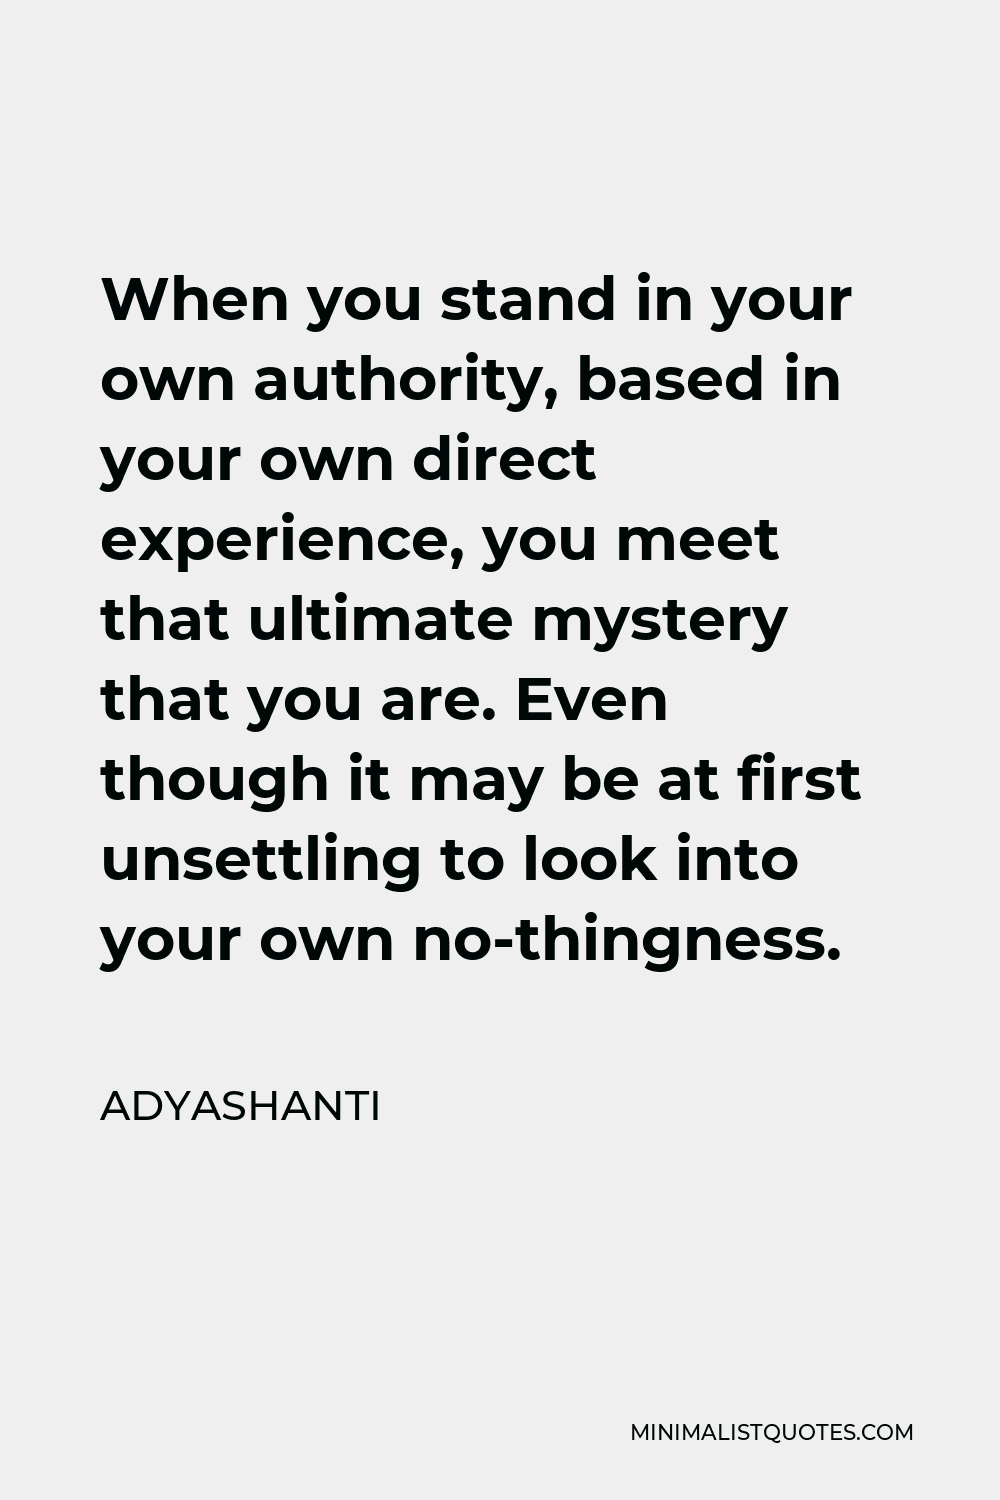 Adyashanti Quote - When you stand in your own authority, based in your own direct experience, you meet that ultimate mystery that you are. Even though it may be at first unsettling to look into your own no-thingness.